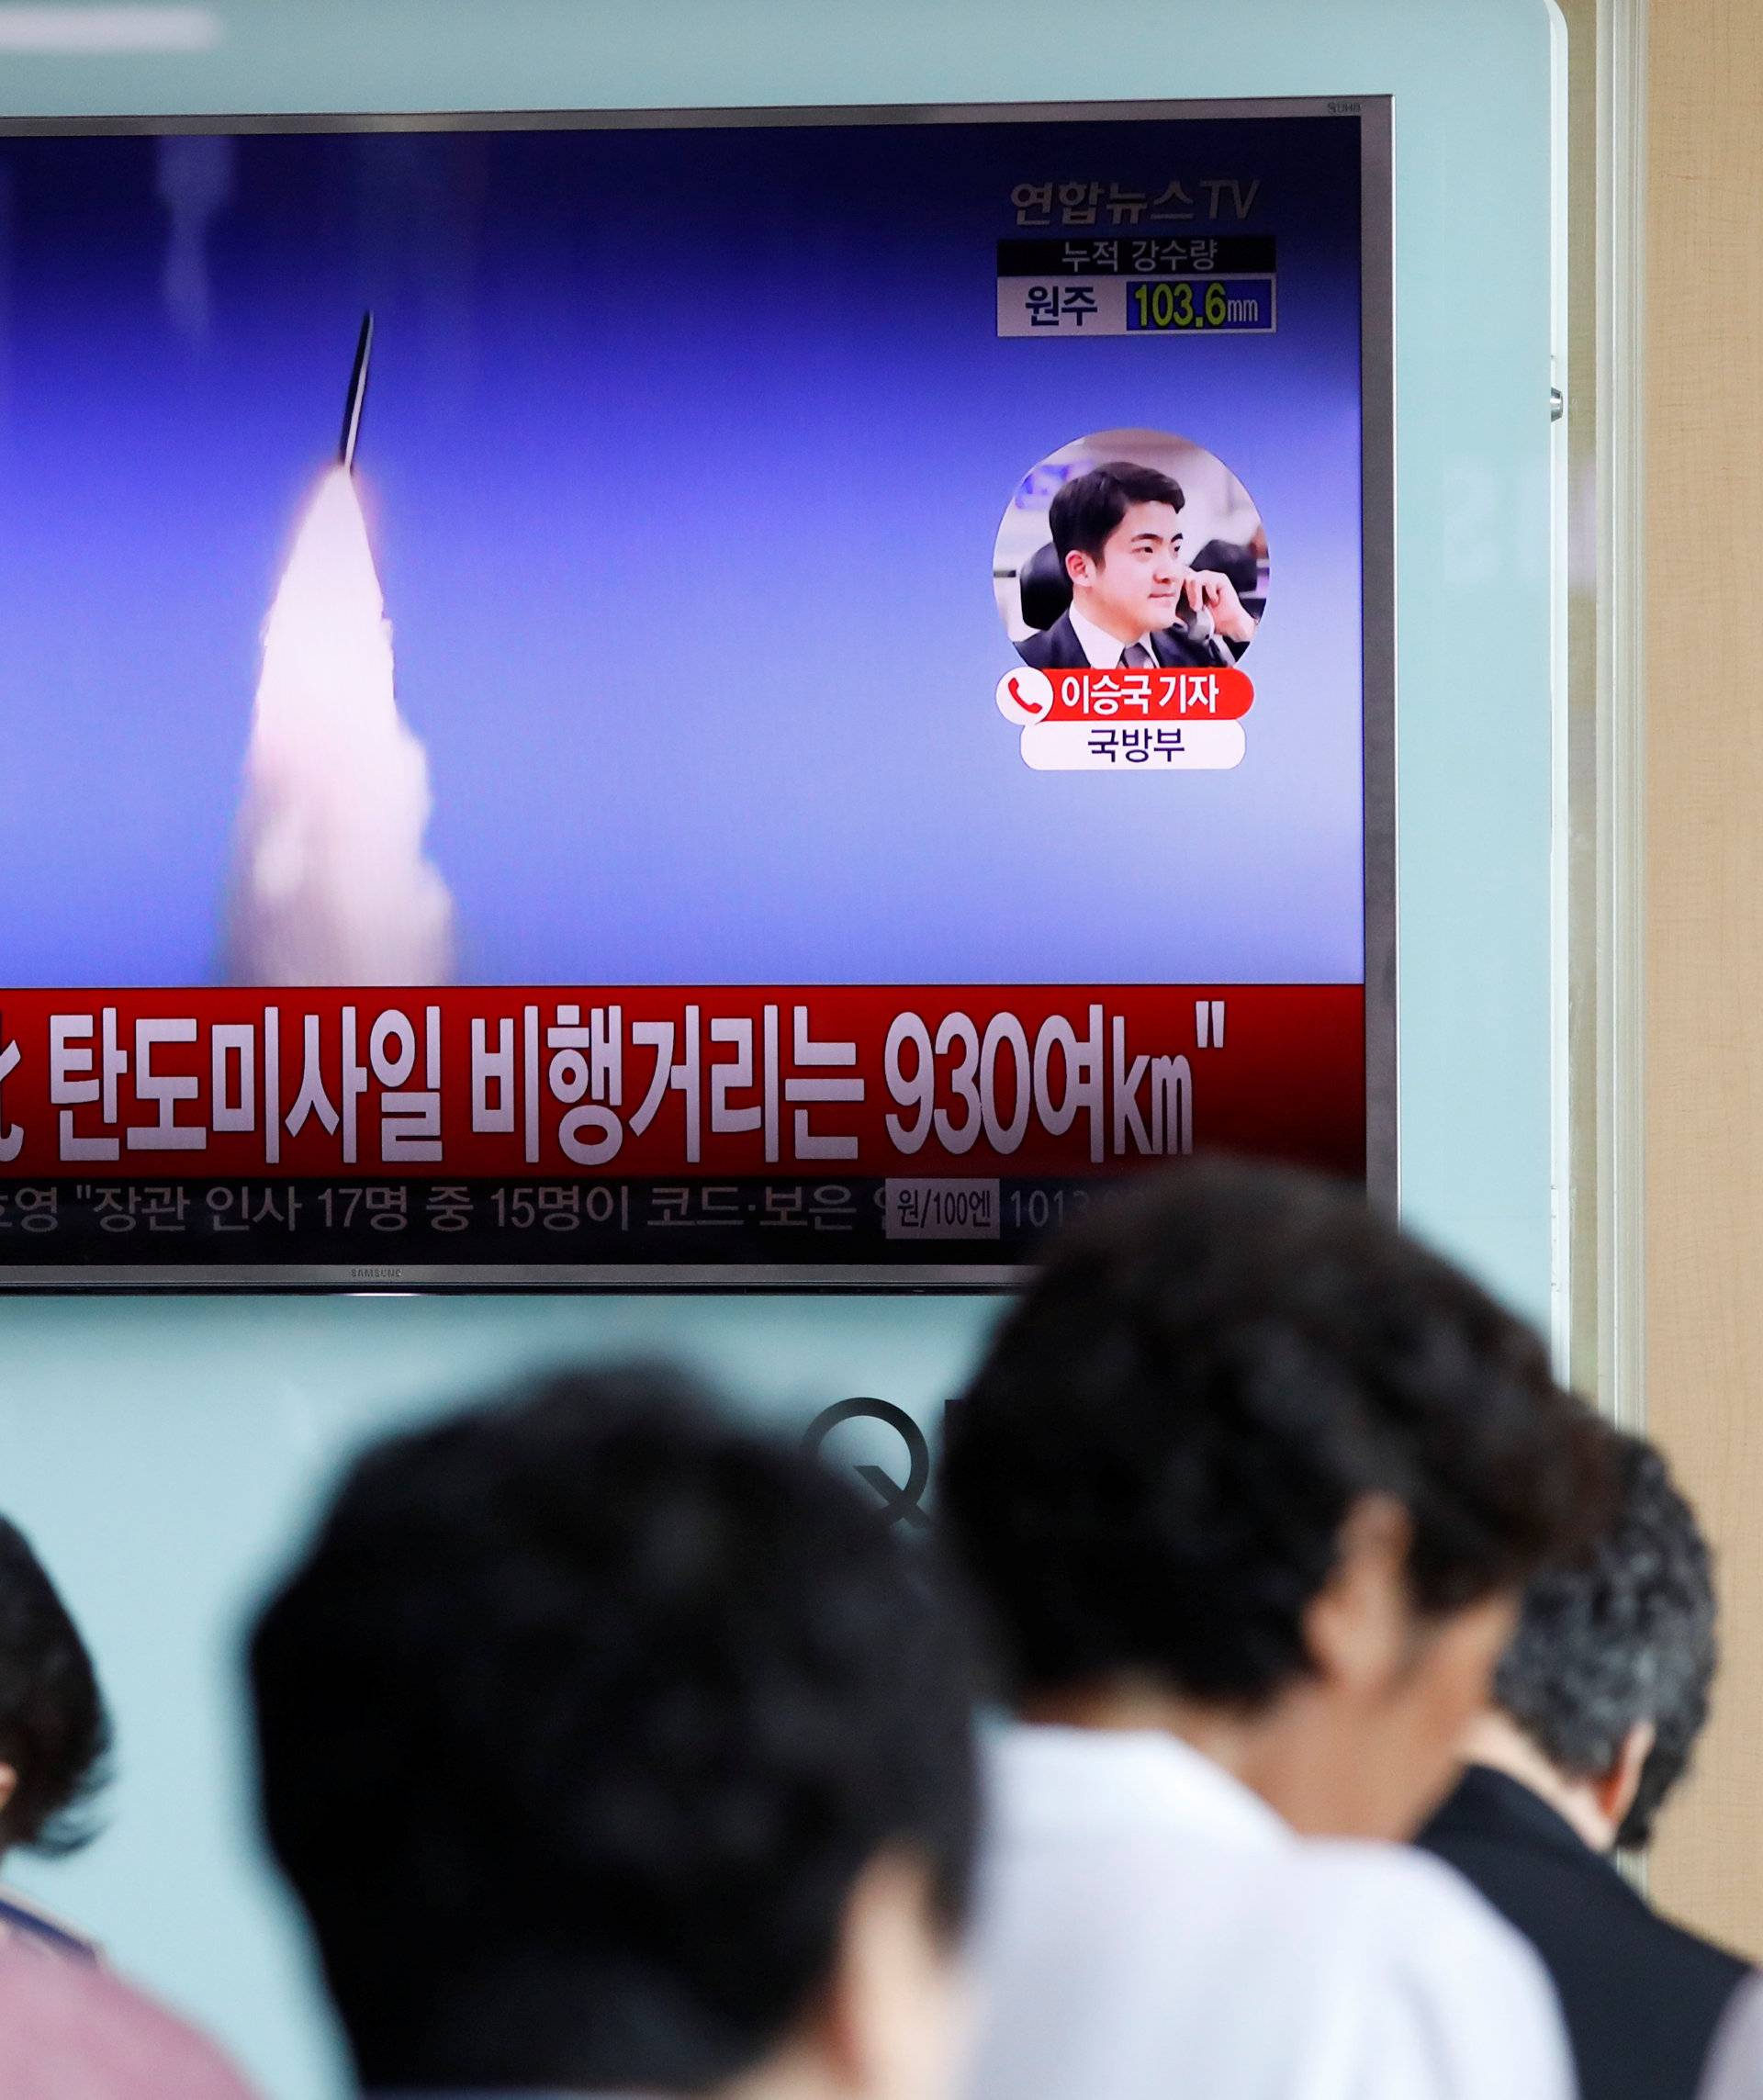 People watch a TV broadcast of a news report on North Korea's ballistic missile test, at a railway station in Seoul